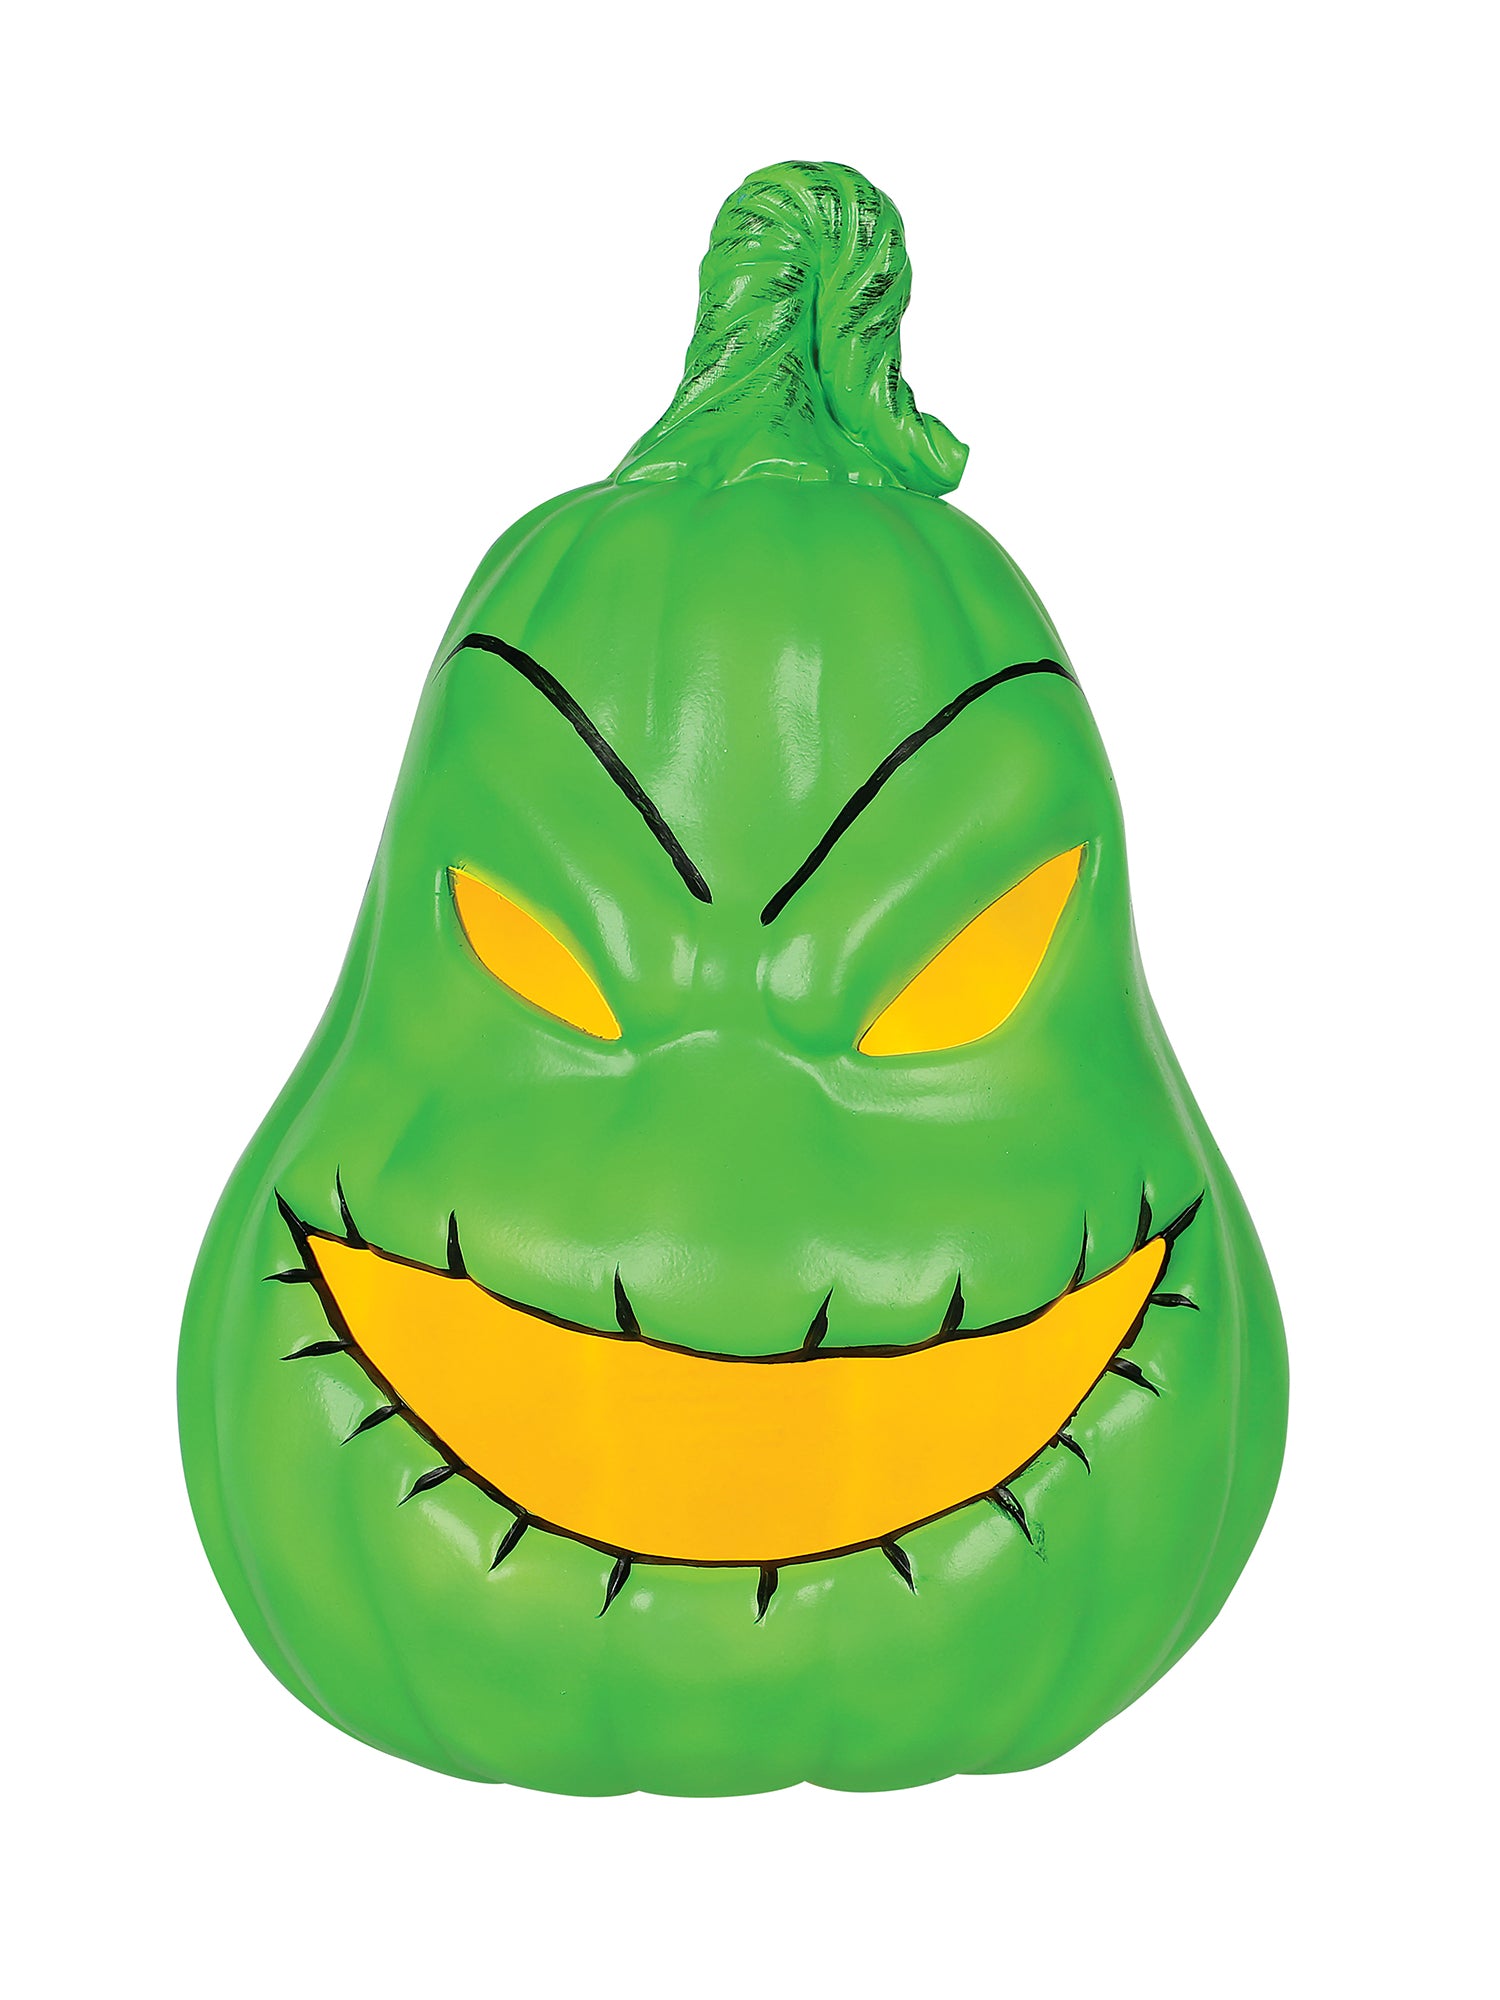 10 Inch The Nightmare Before Christmas Oogie Boogie Light Up Pumpkin - costumes.com